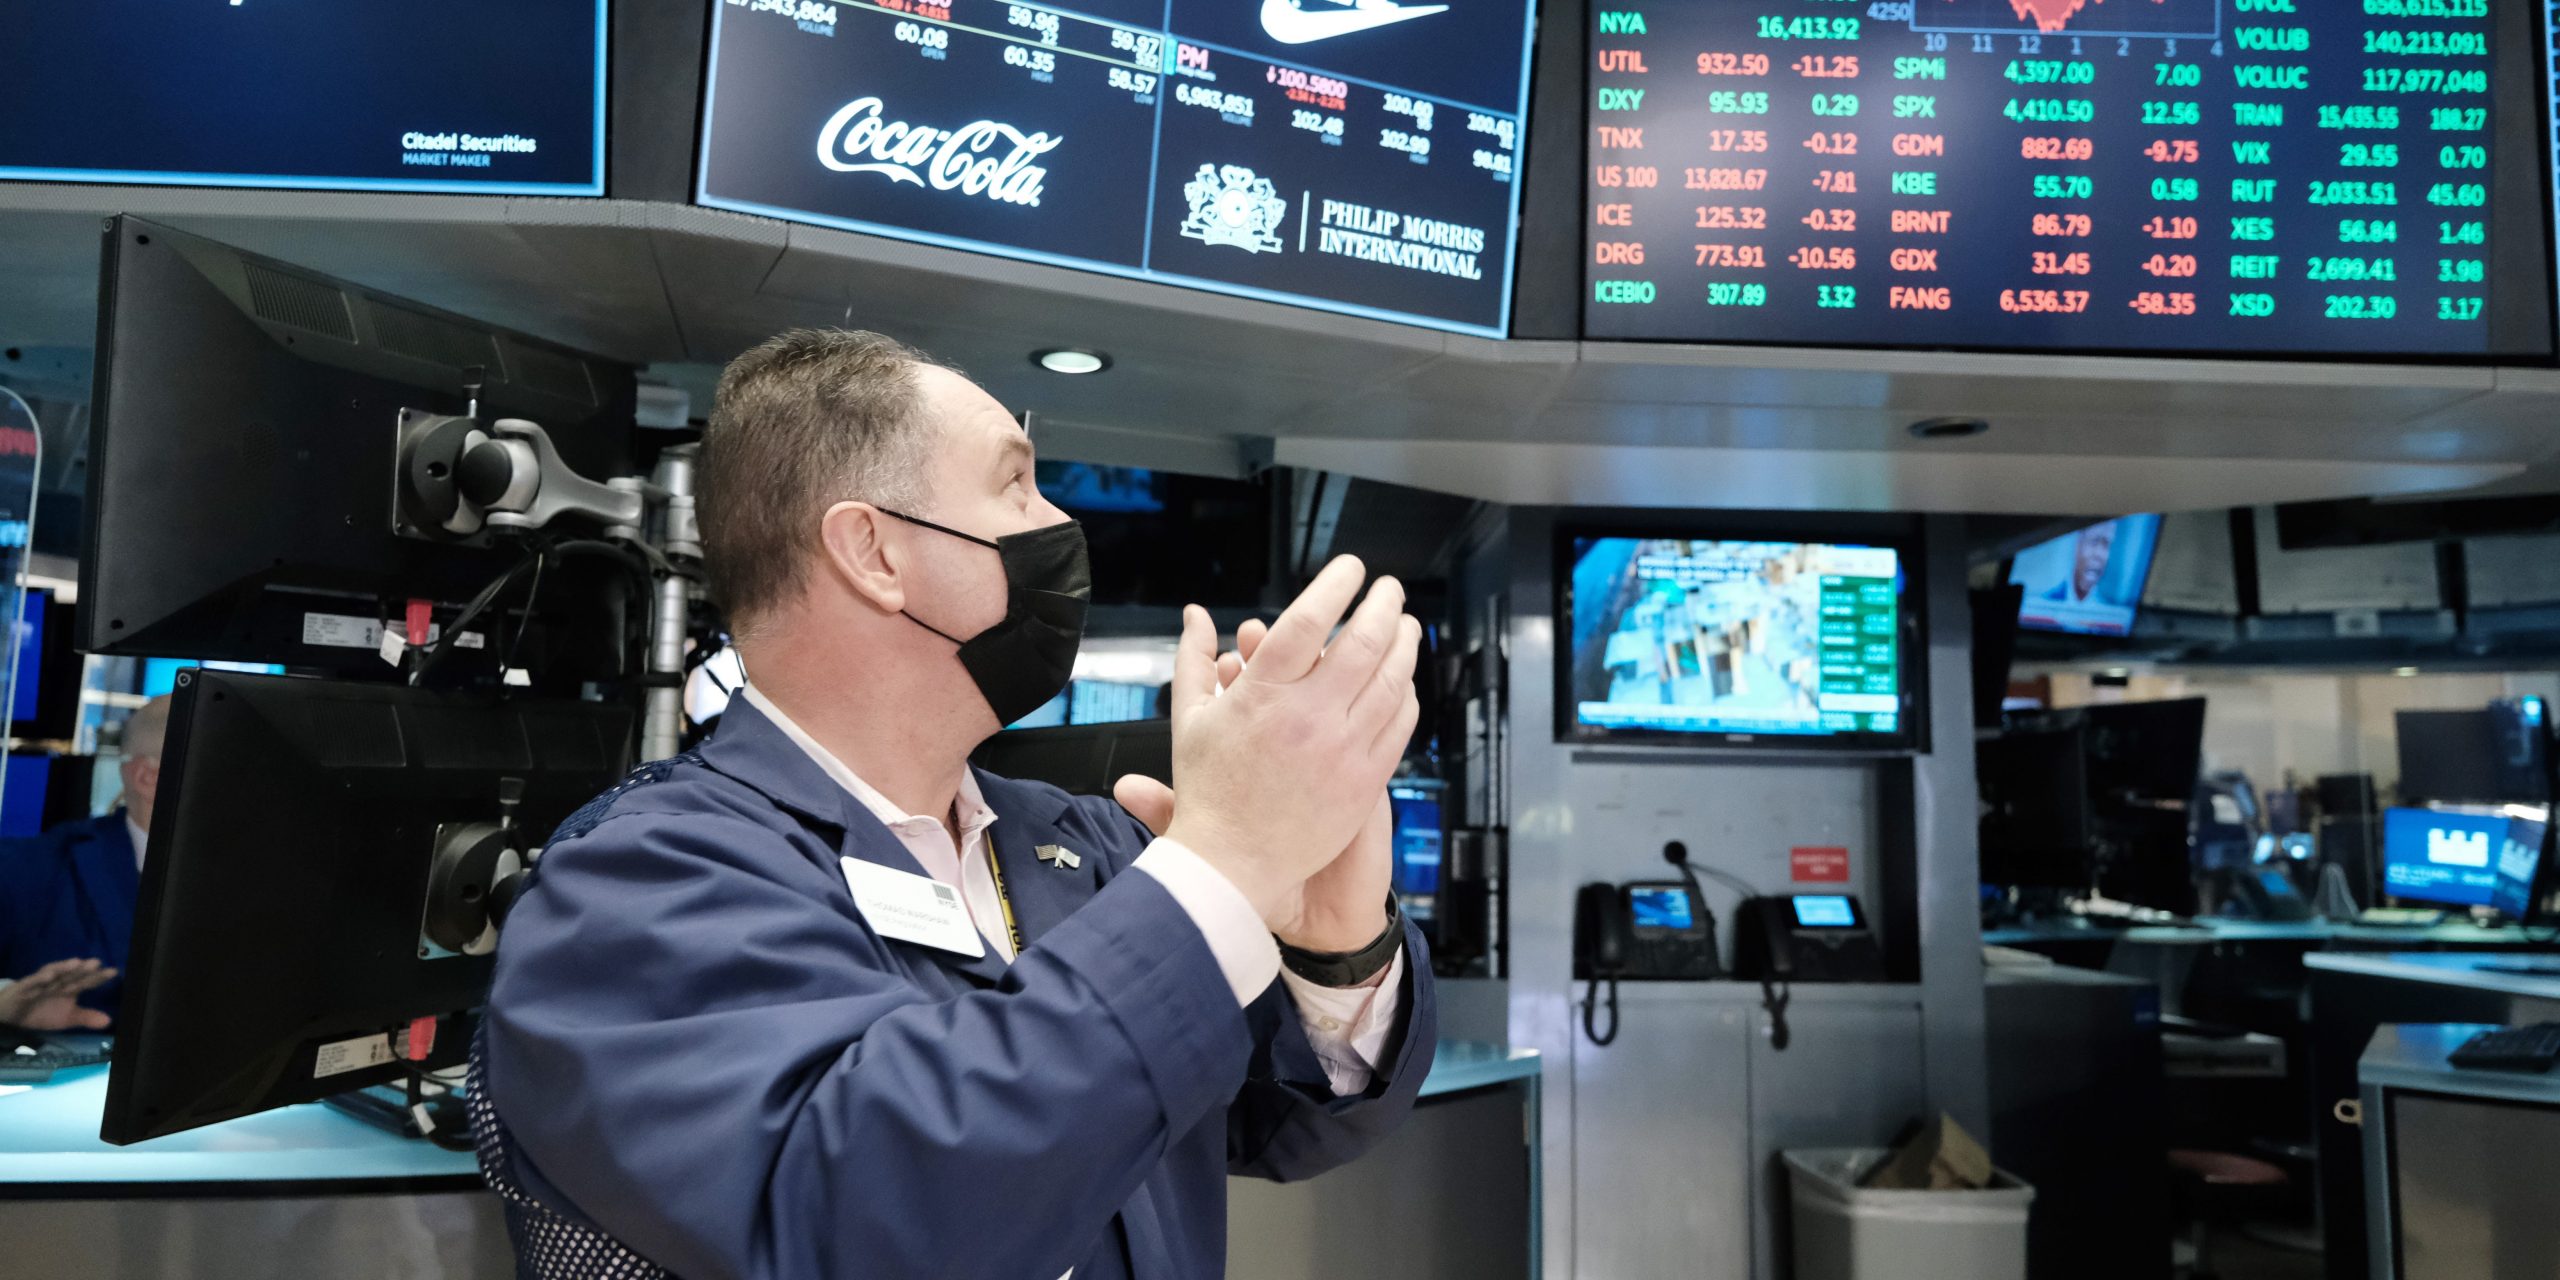 A trader claps on the floor of the New York Stock Exchange as the Dow Jones Industrial Average turns positive on January 24, 2022 in New York City.